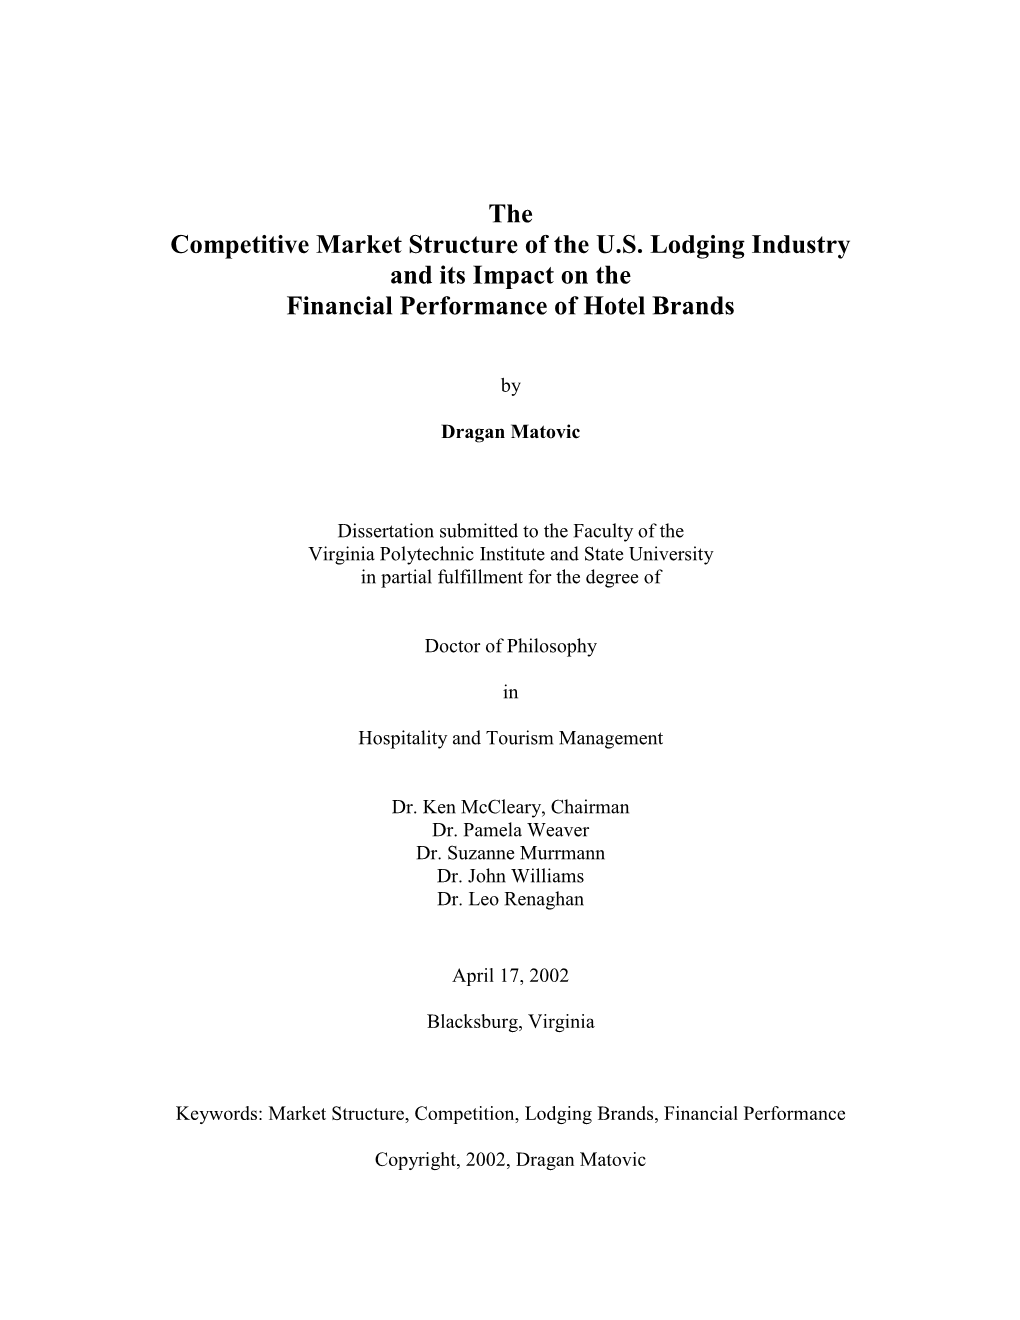 The Competitive Market Structure of the U.S. Lodging Industry and Its Impact on the Financial Performance of Hotel Brands